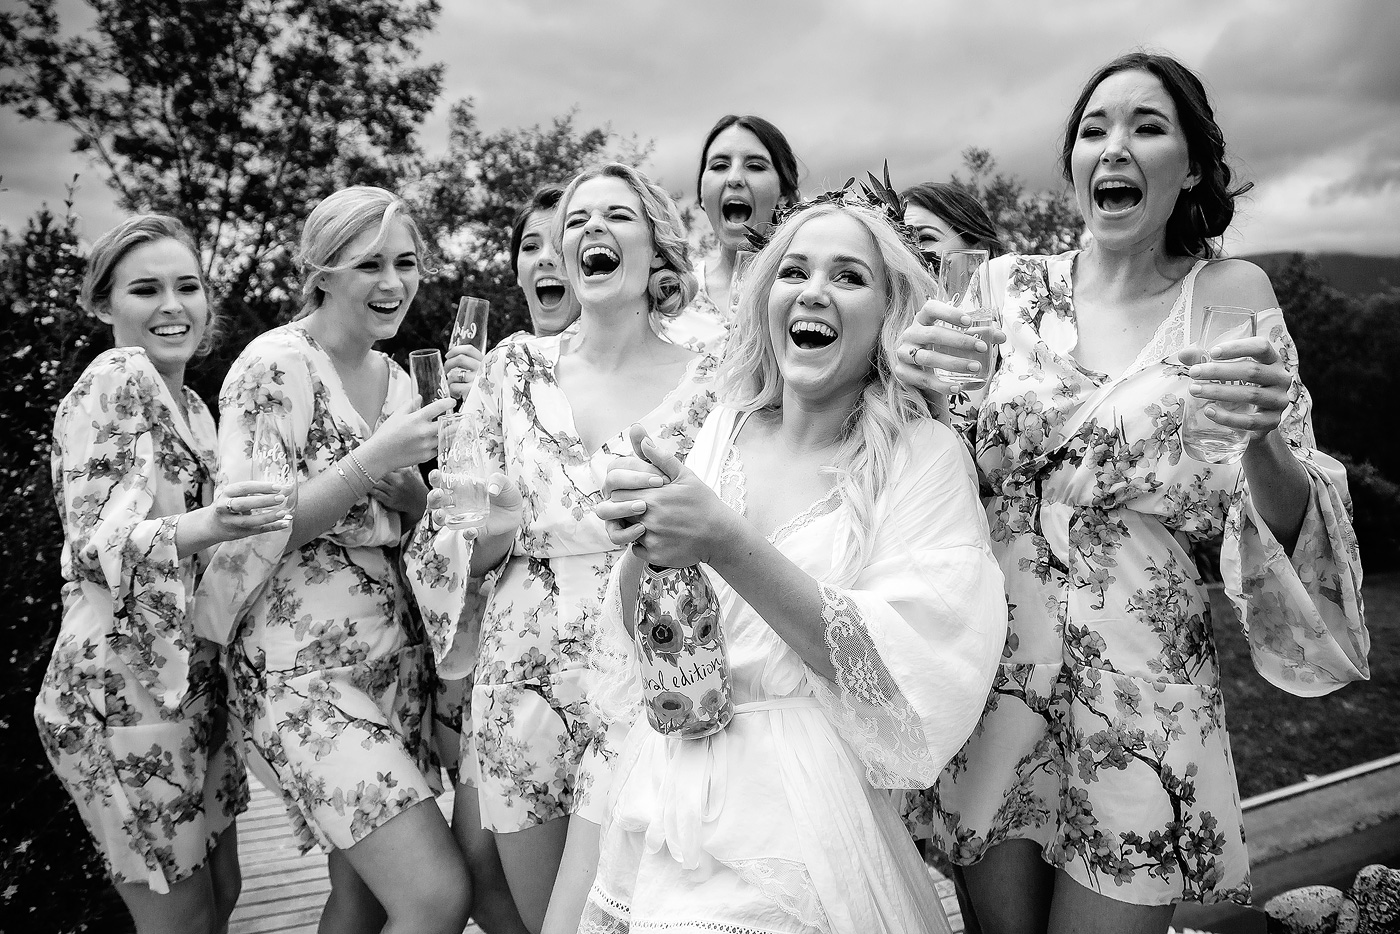 Bride and bridesmaids reaction while popping the champagne on the wedding day